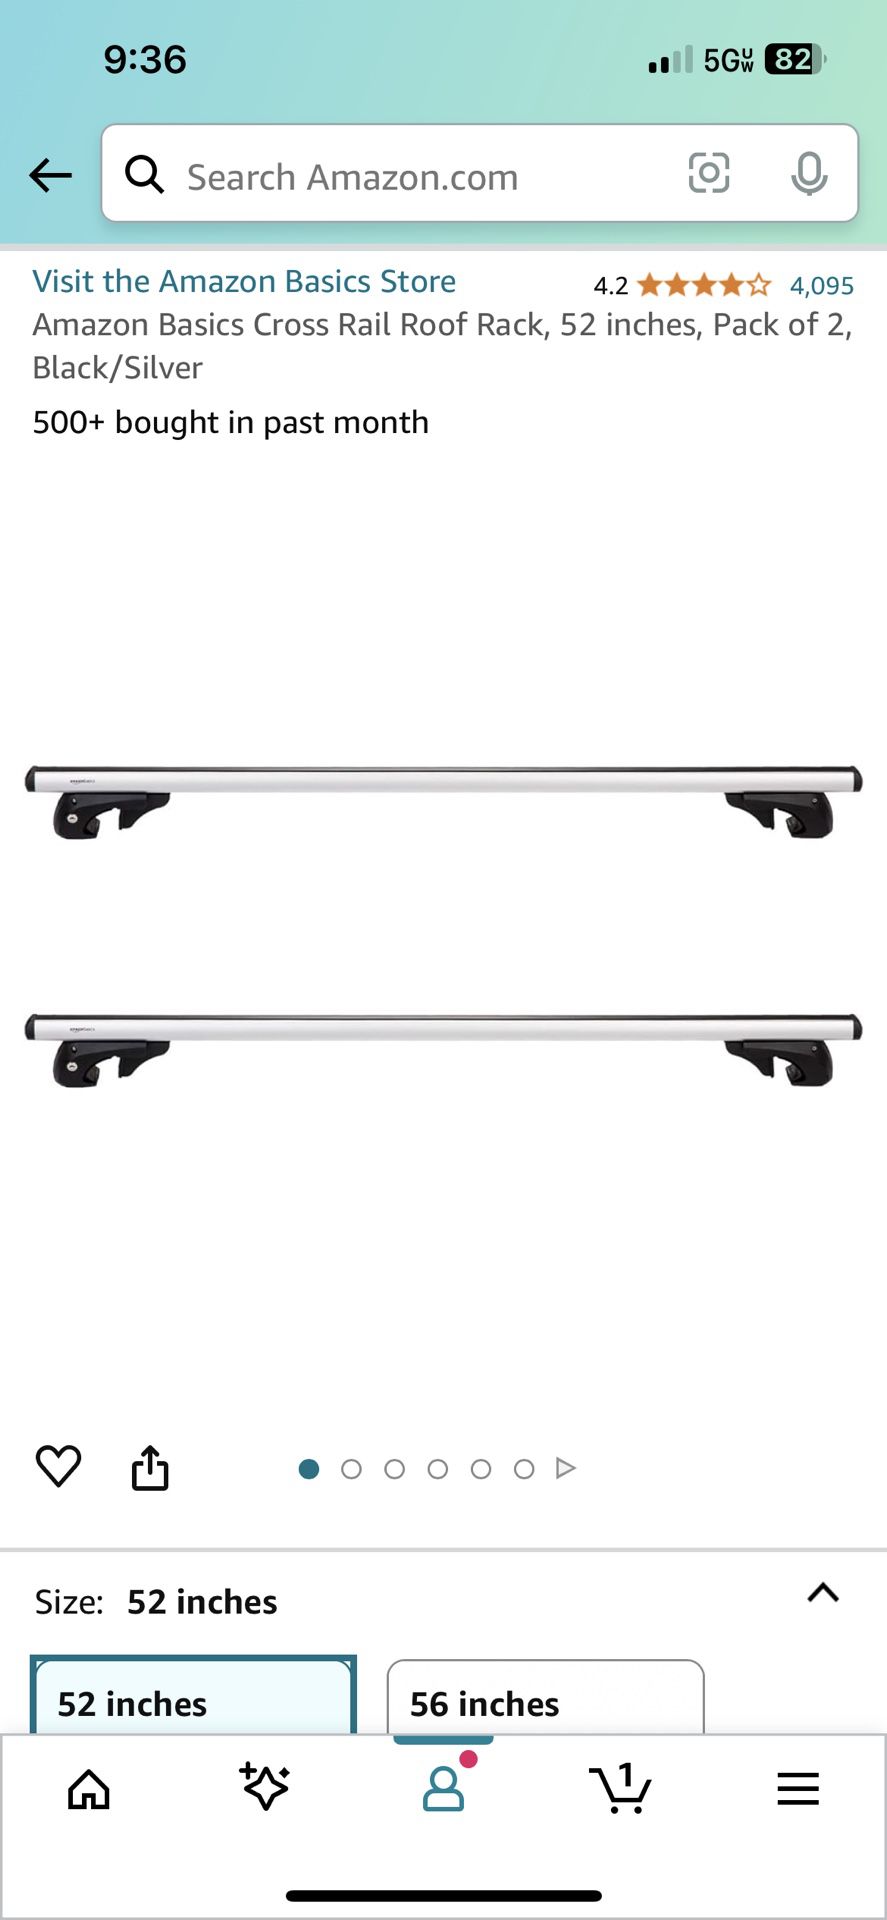 Amazon Basics Cross Rail Roof Rack, 52 inches, Pack of 2, Black/Silver